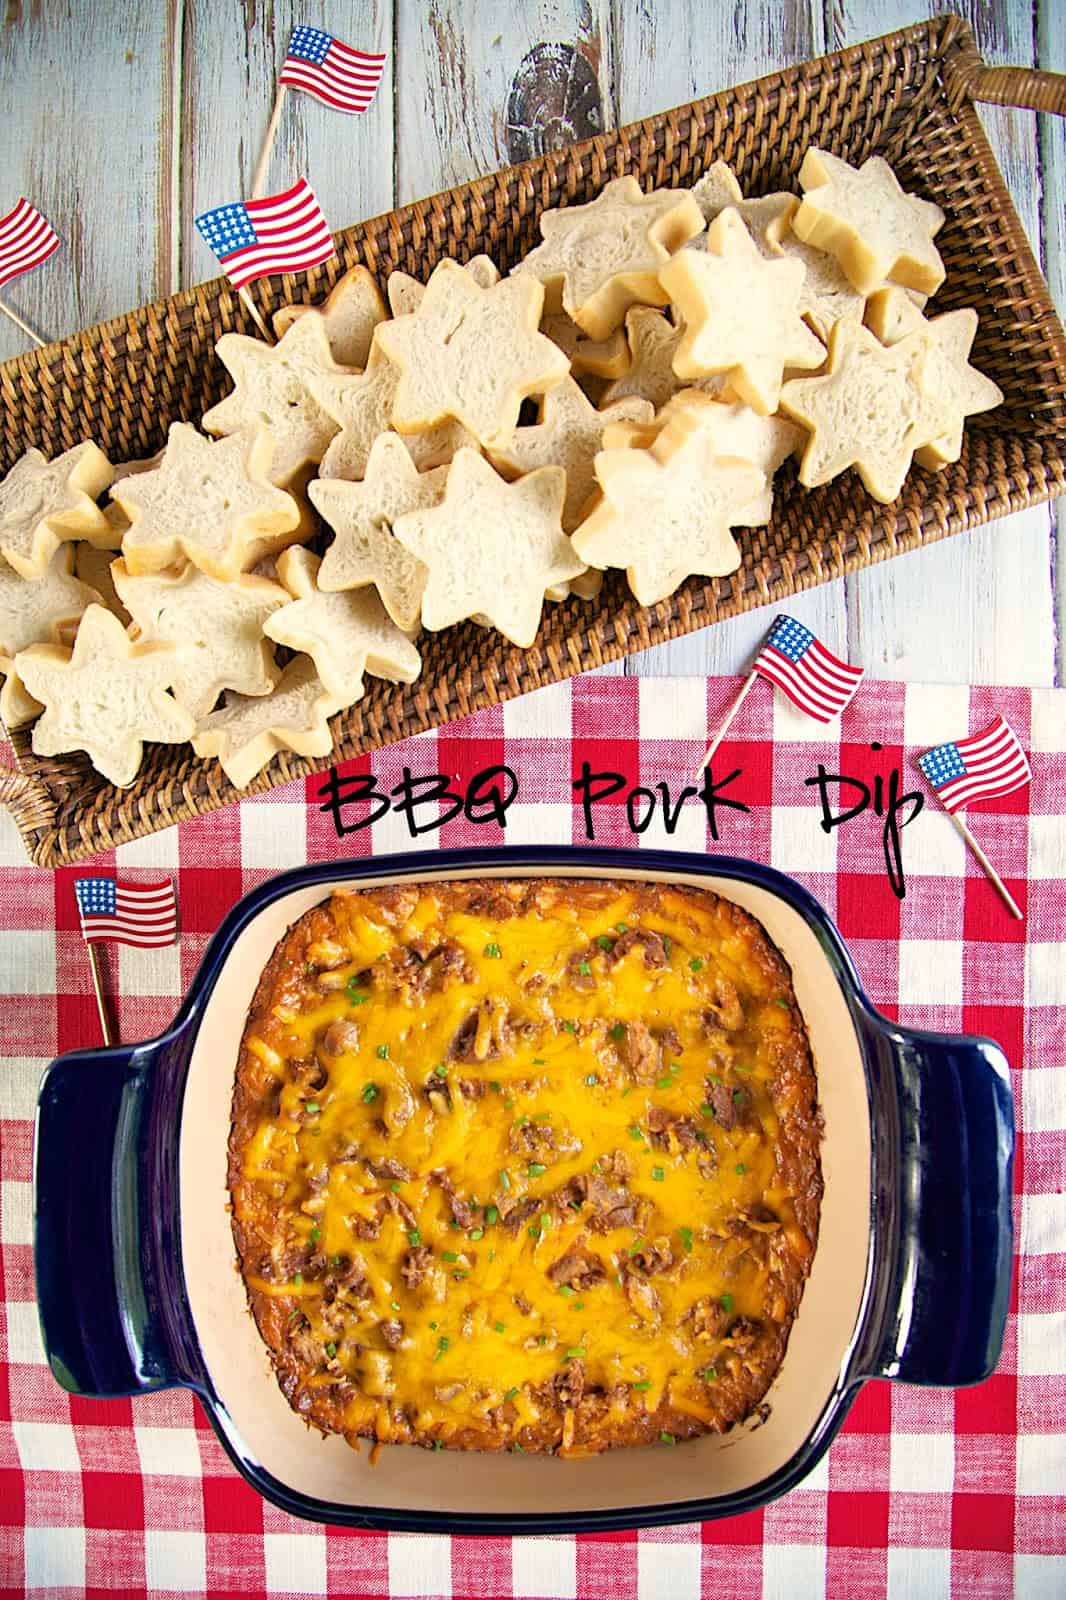 BBQ Pork Dip - THE BEST! I could make a meal out of this dip! Pork, cream cheese, Ranch, BBQ sauce, cheddar cheese and green onions. YUM! You can make this dip ahead of time and refrigerate until you are ready to bake. Perfect for bringing to a party!